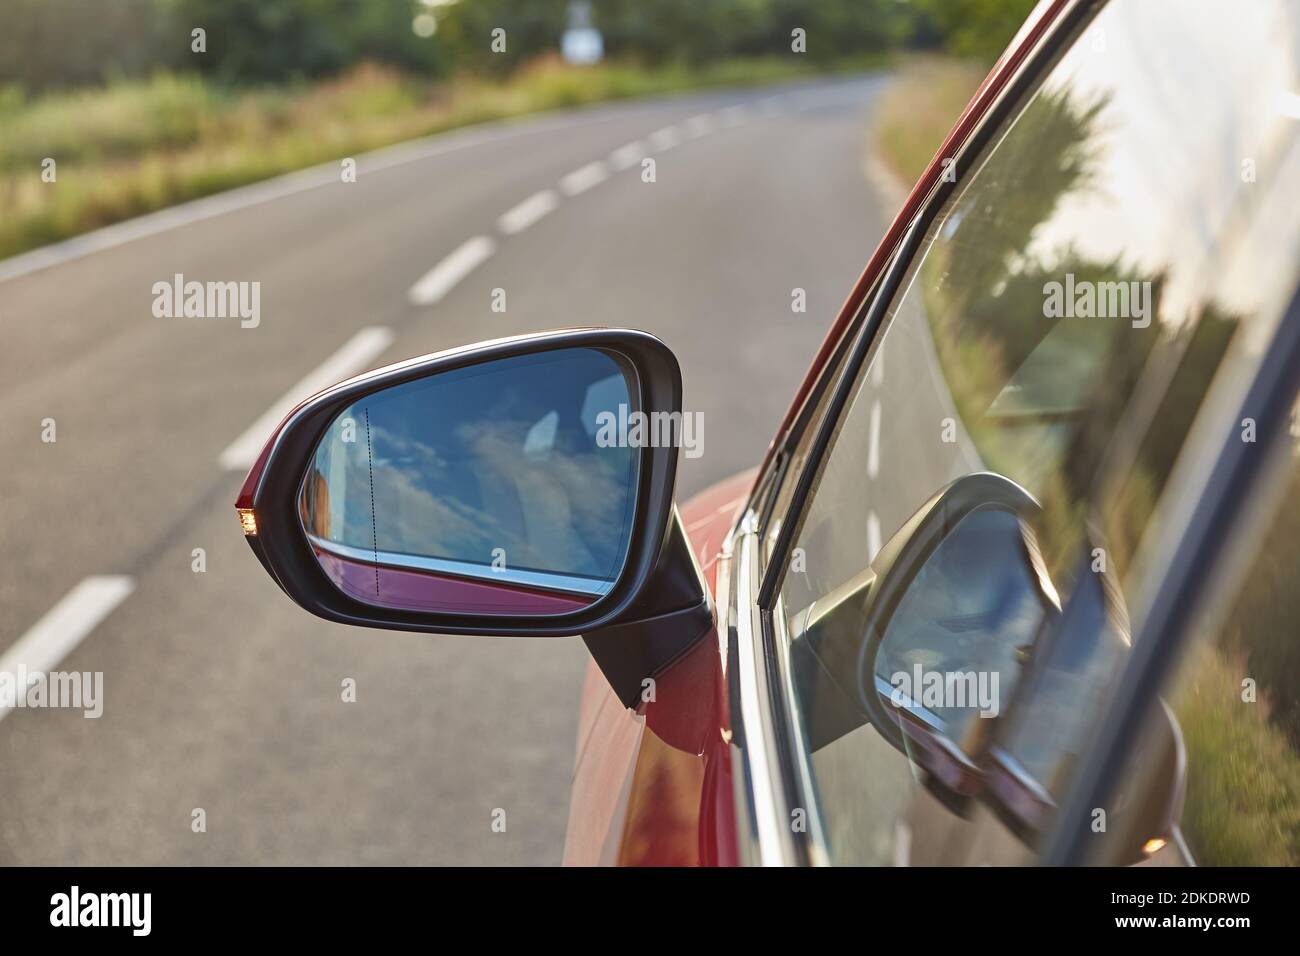 Car side view mirror Stock Photo